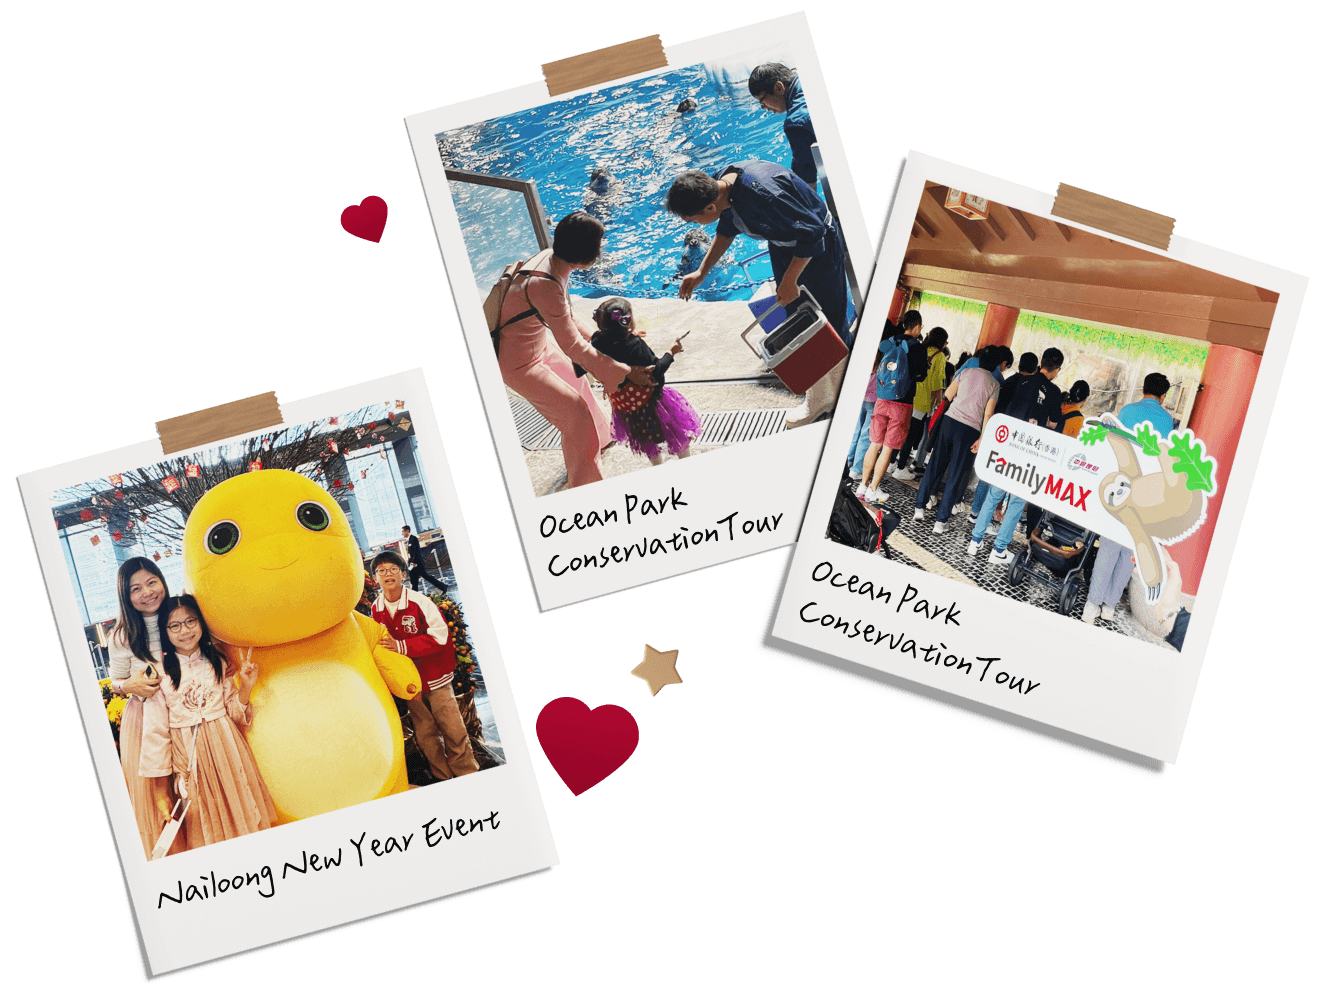 Nurture love in children and promote their holistic development through unique and engaging activities, such as "Ocean Park Conservation Tour" and "Nailoong New Year Event".